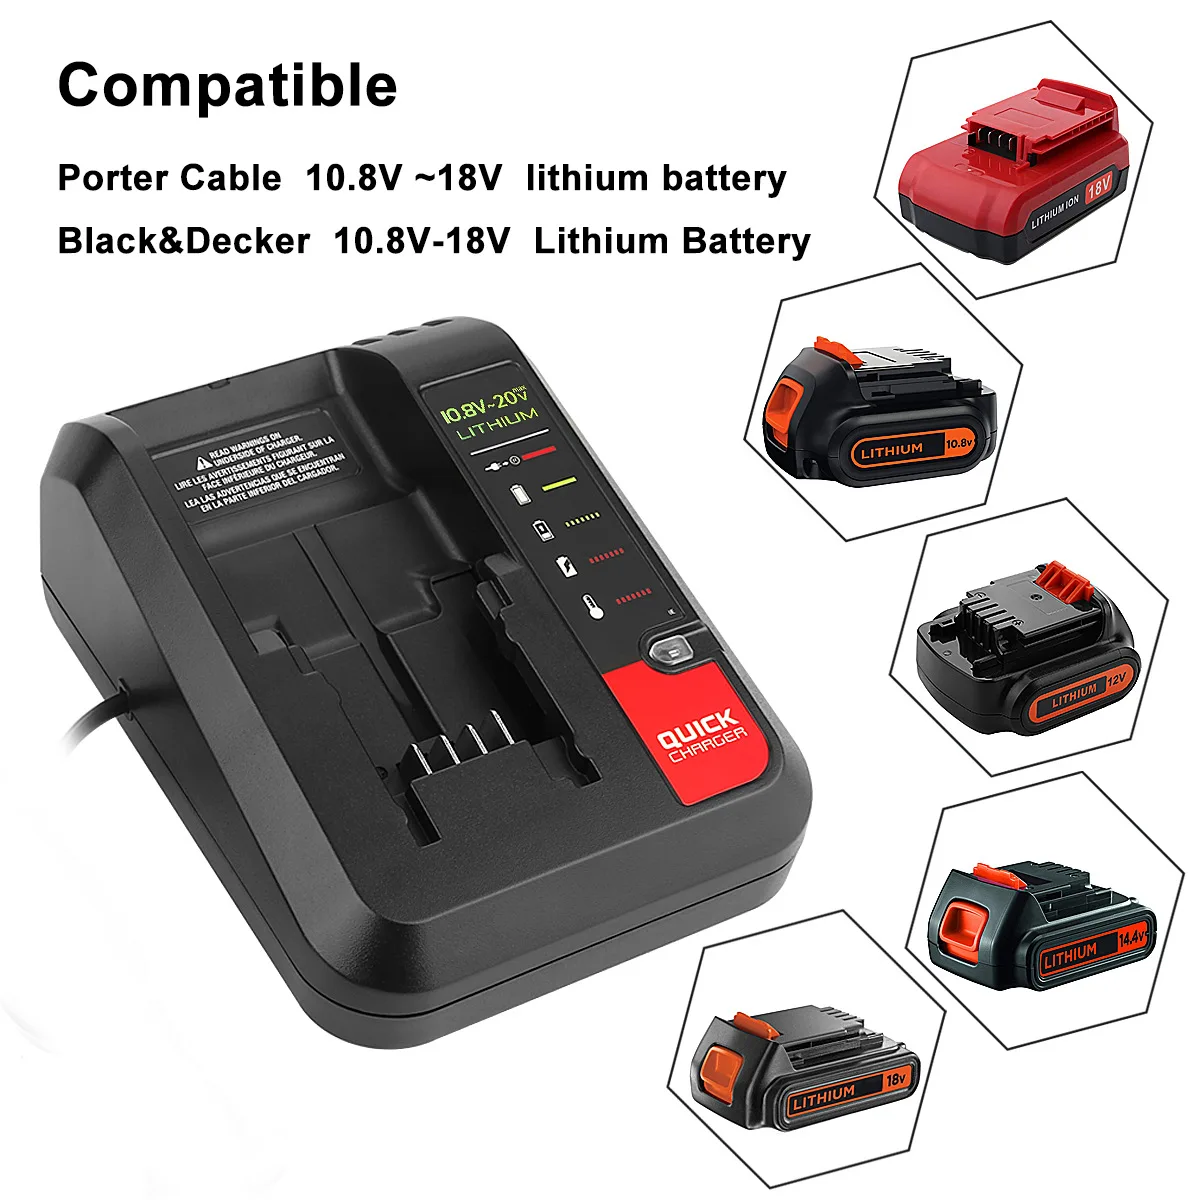 18V Replacement Lithium Battery Charger for Black and Decker PORTER CABLE Stanley Lithium Battery Charger 2A 10.8-20V 100-240V